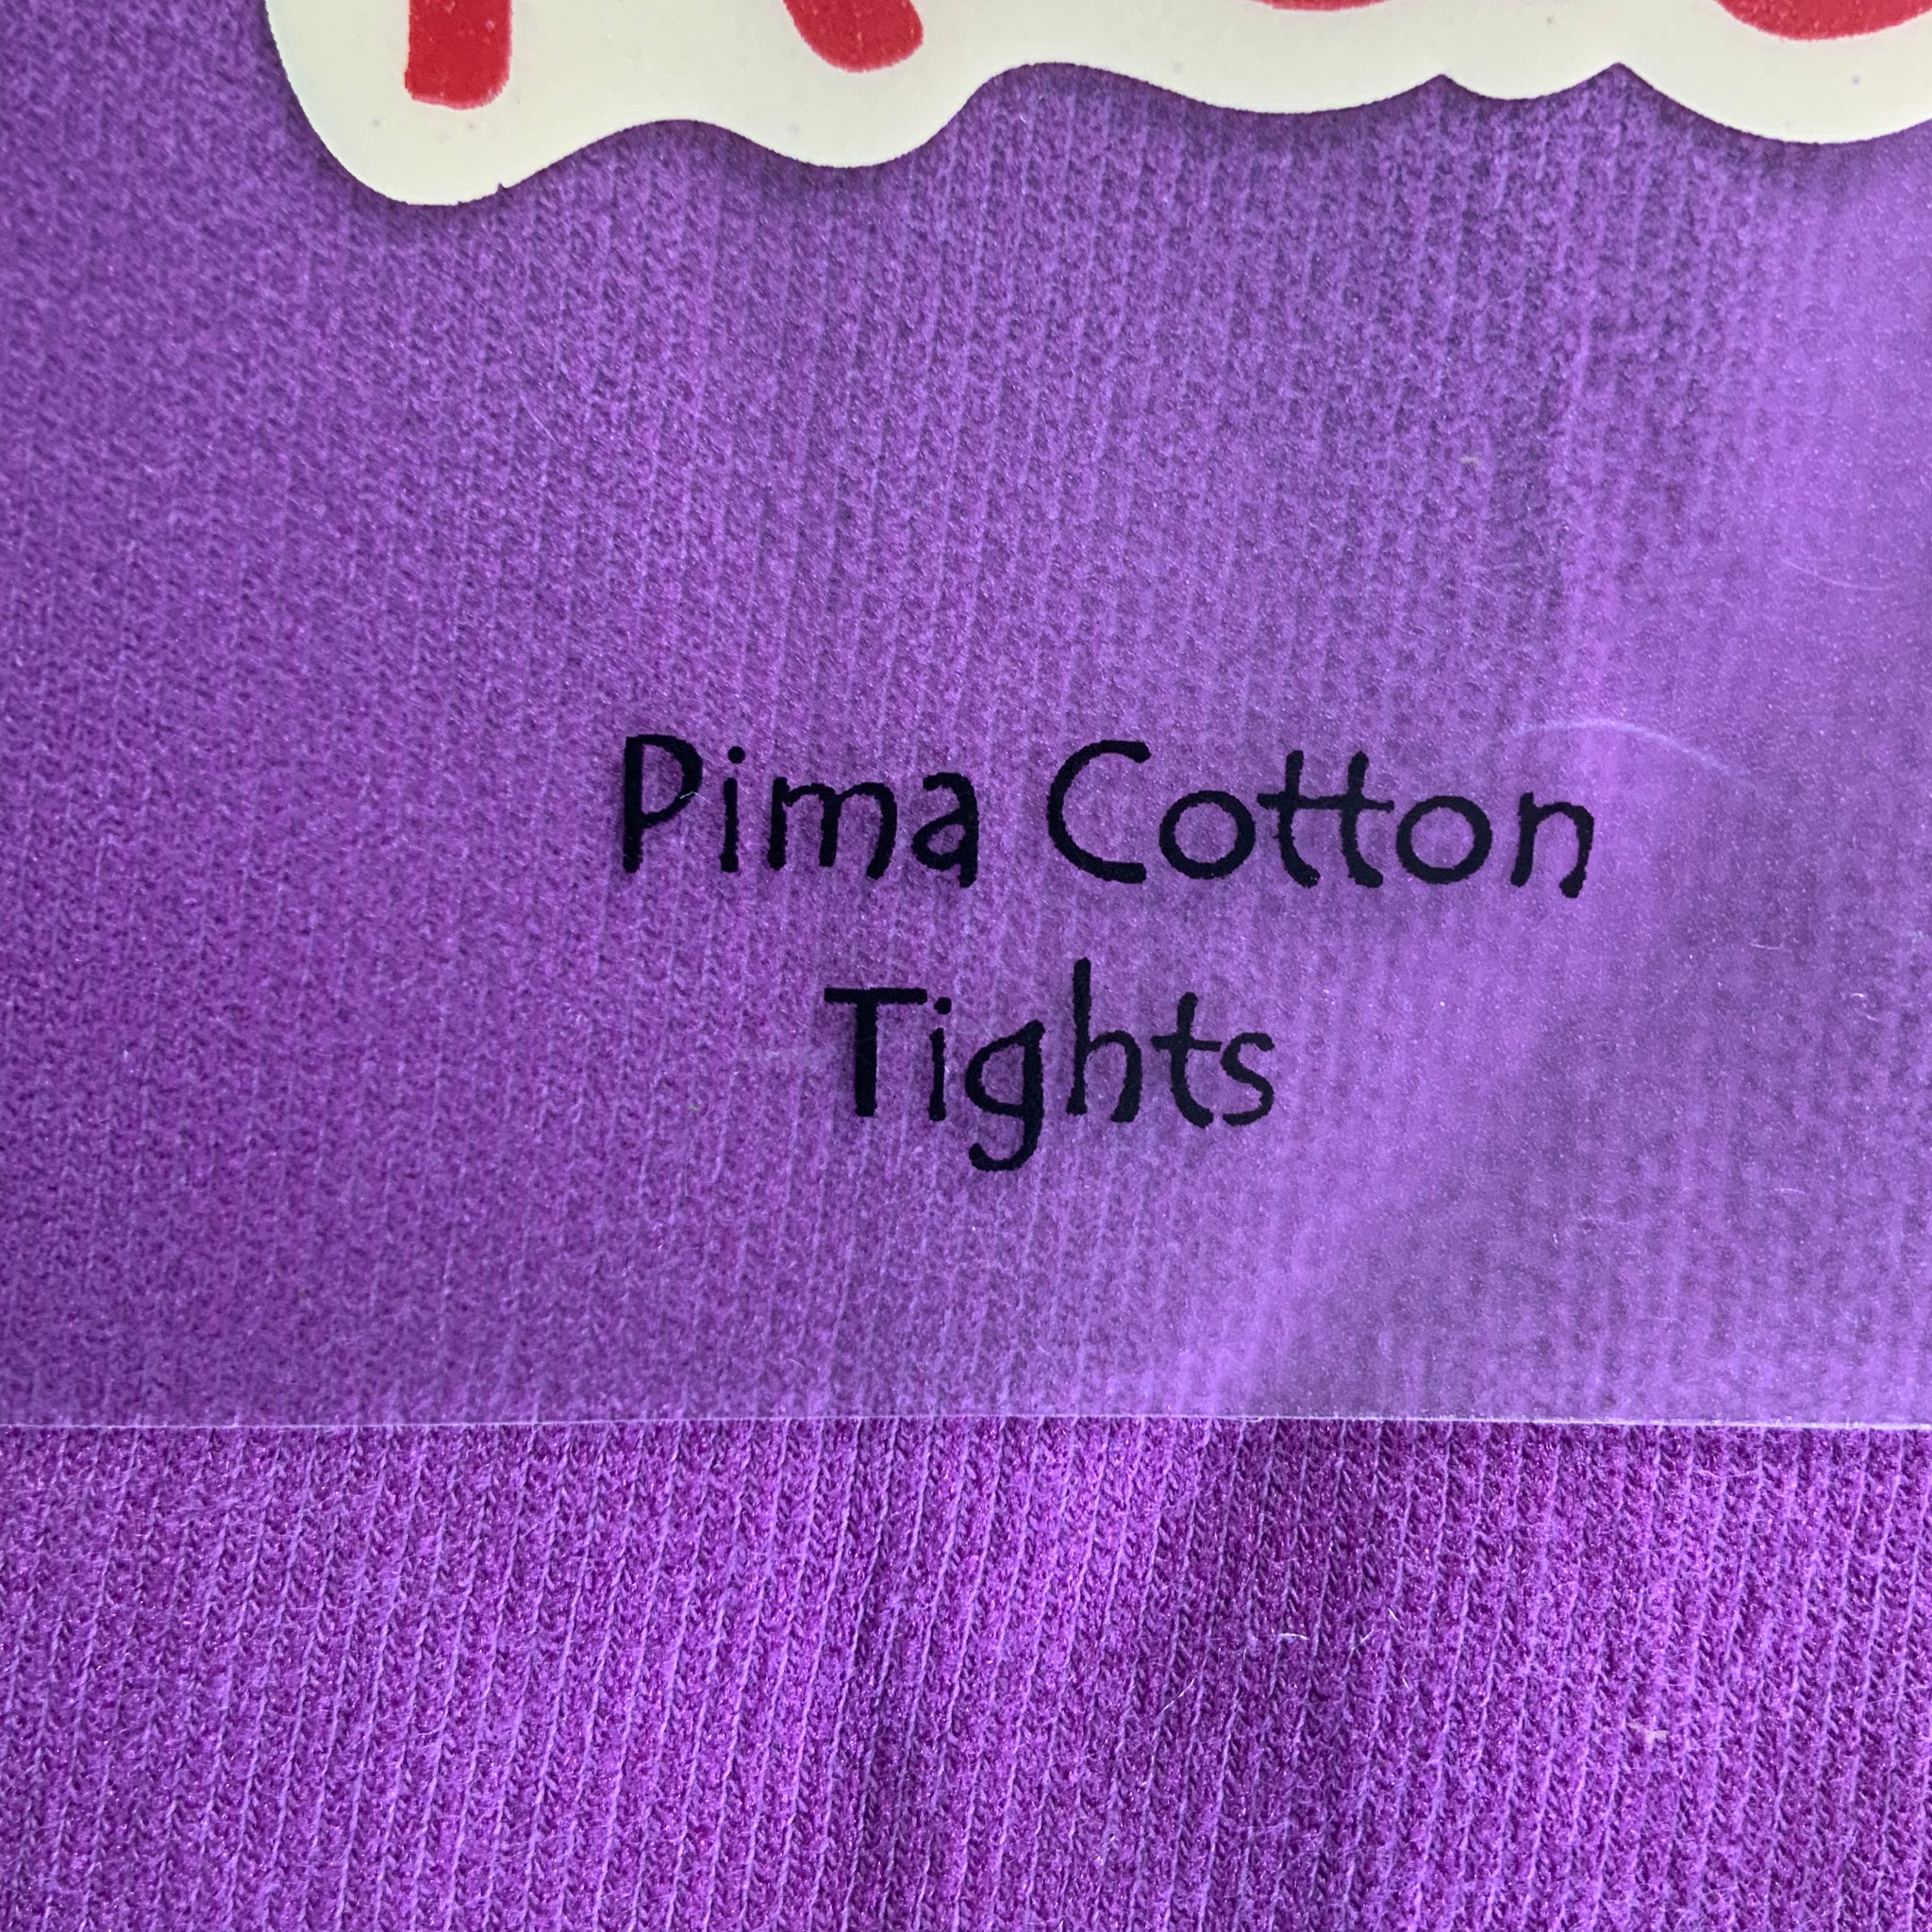 Country Kids Soft Purple Pima Cotton Tights for Little Legs